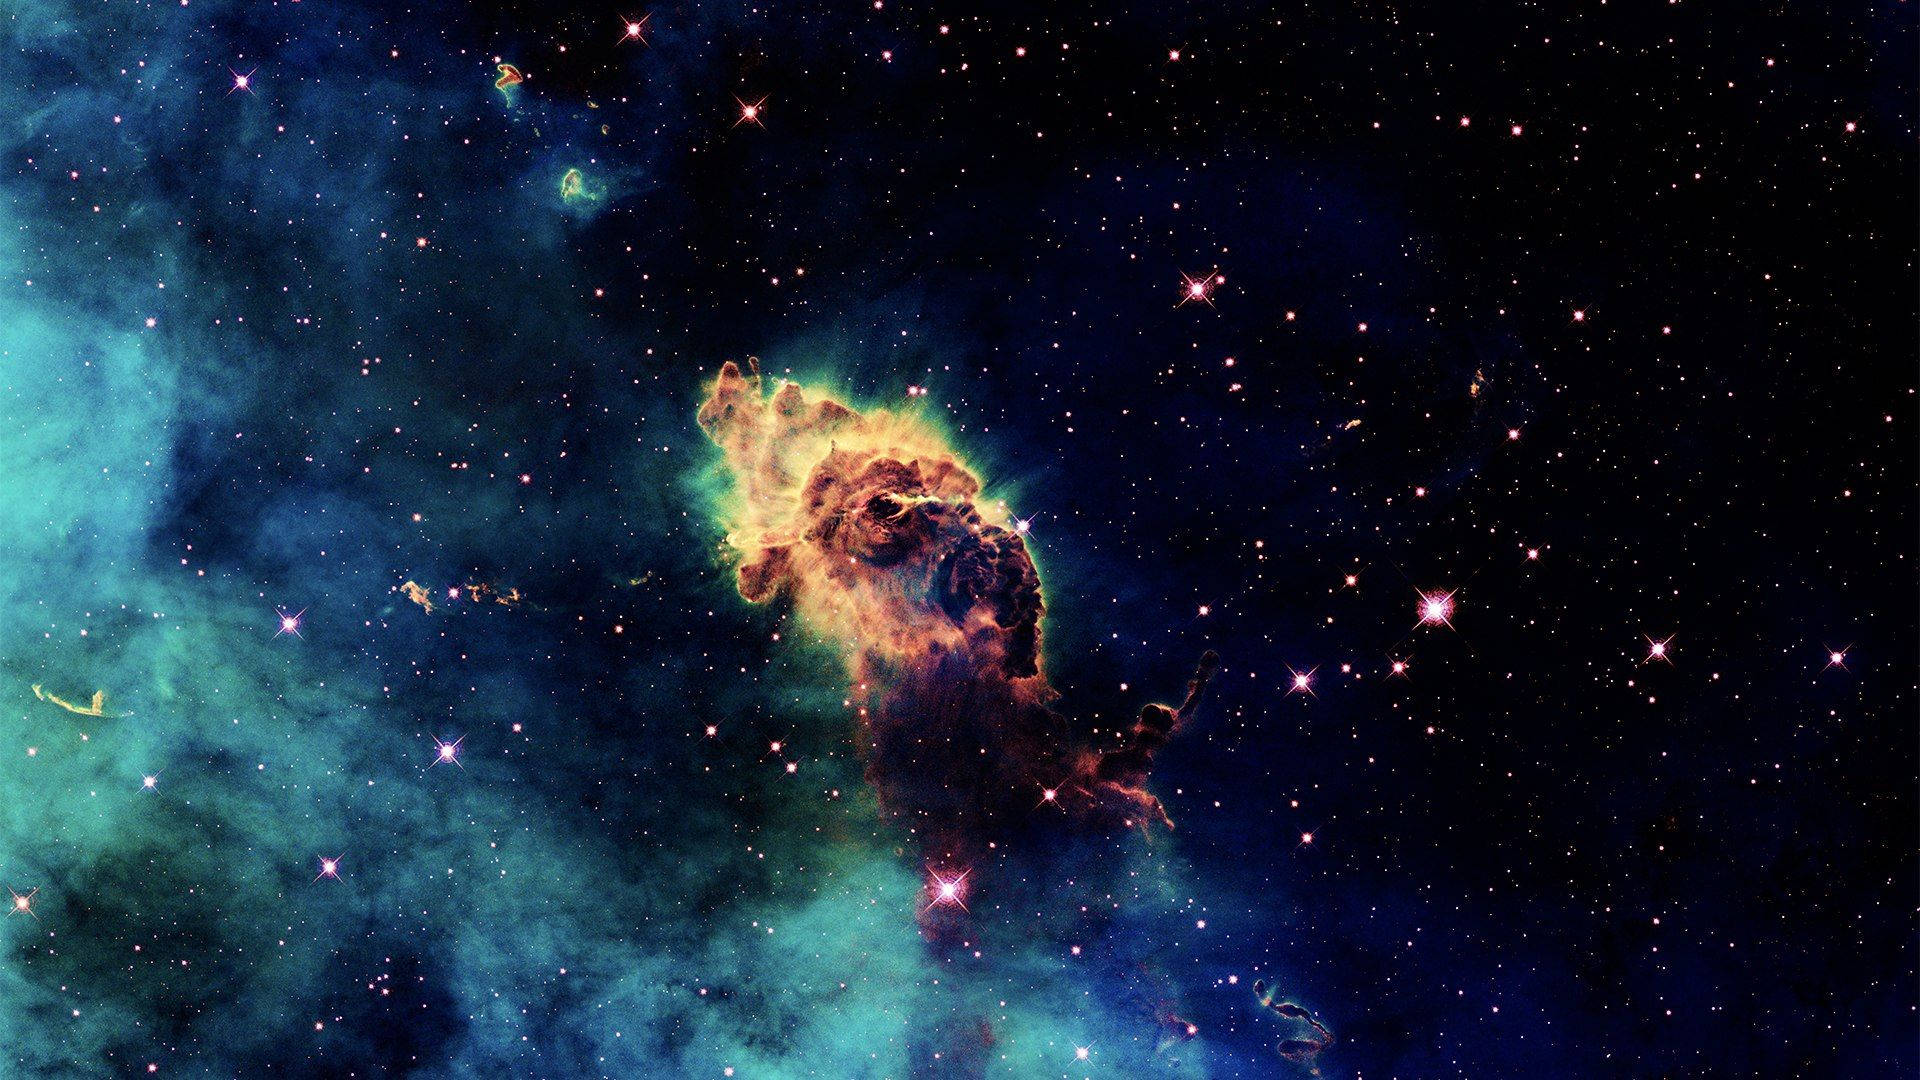 Burning Cloud in a Blue Outer Space